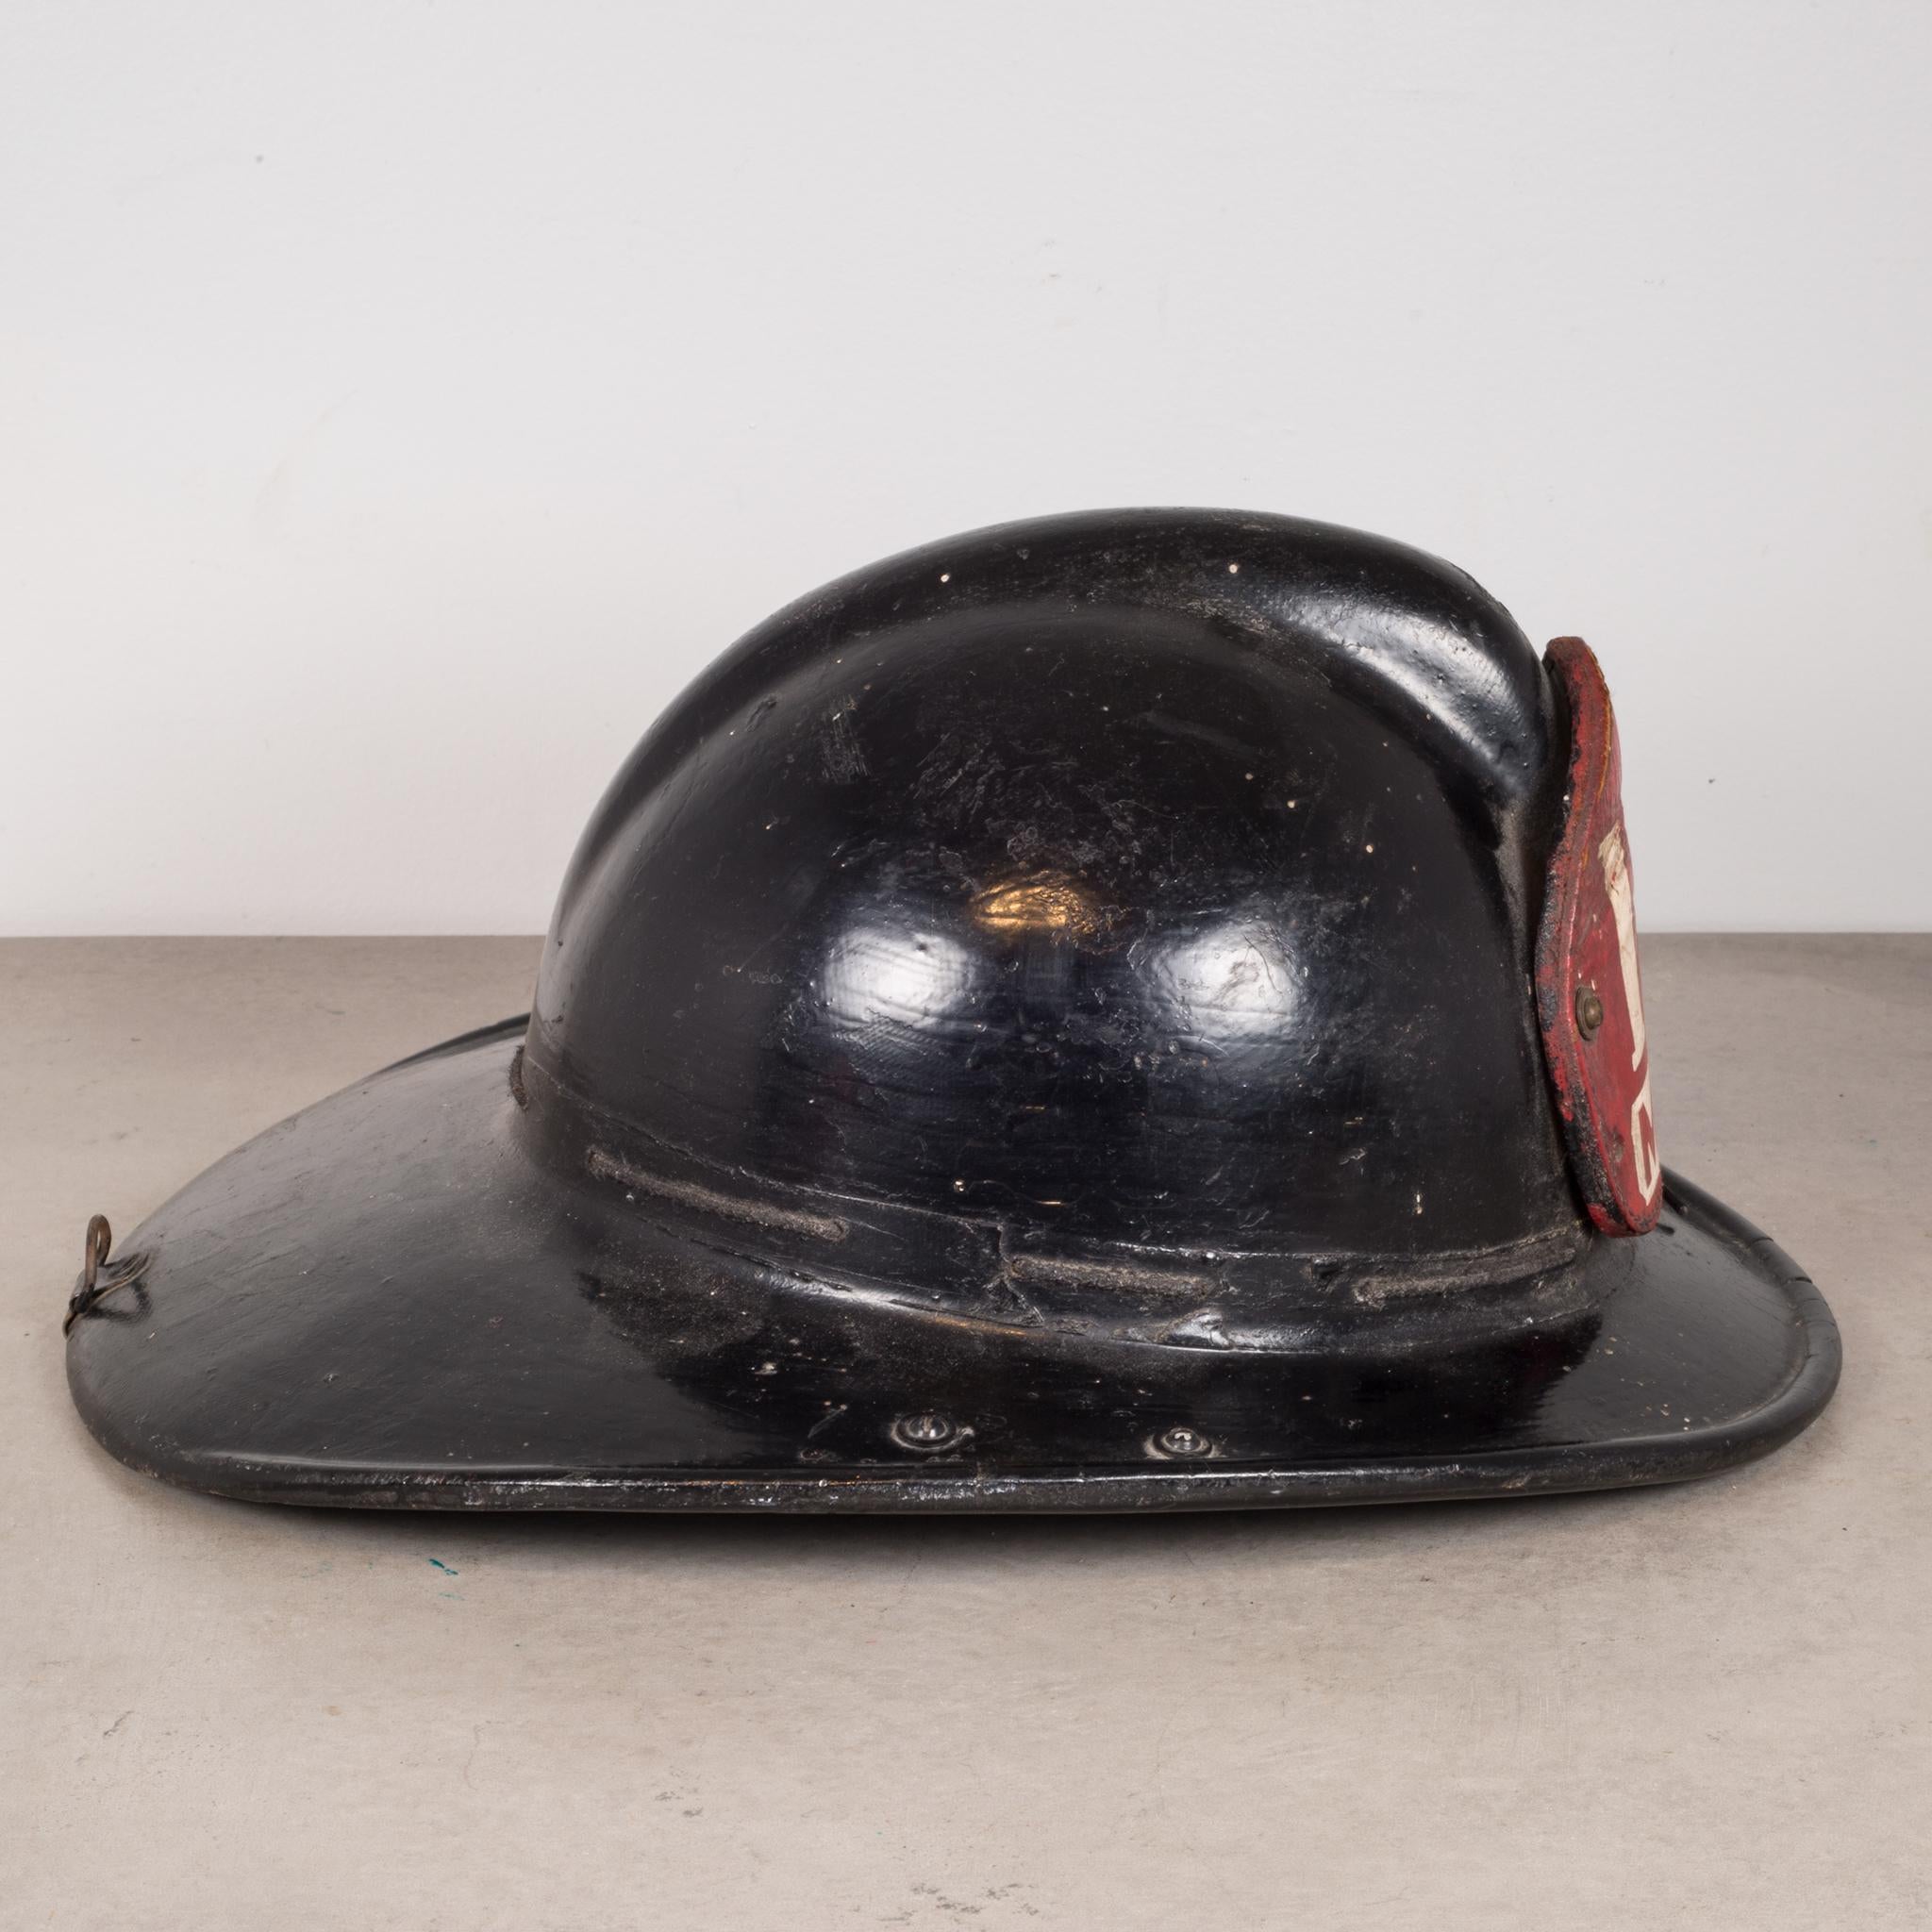 Industrial Black Fireman's Helmet with Leather Shield, circa 1940-1950